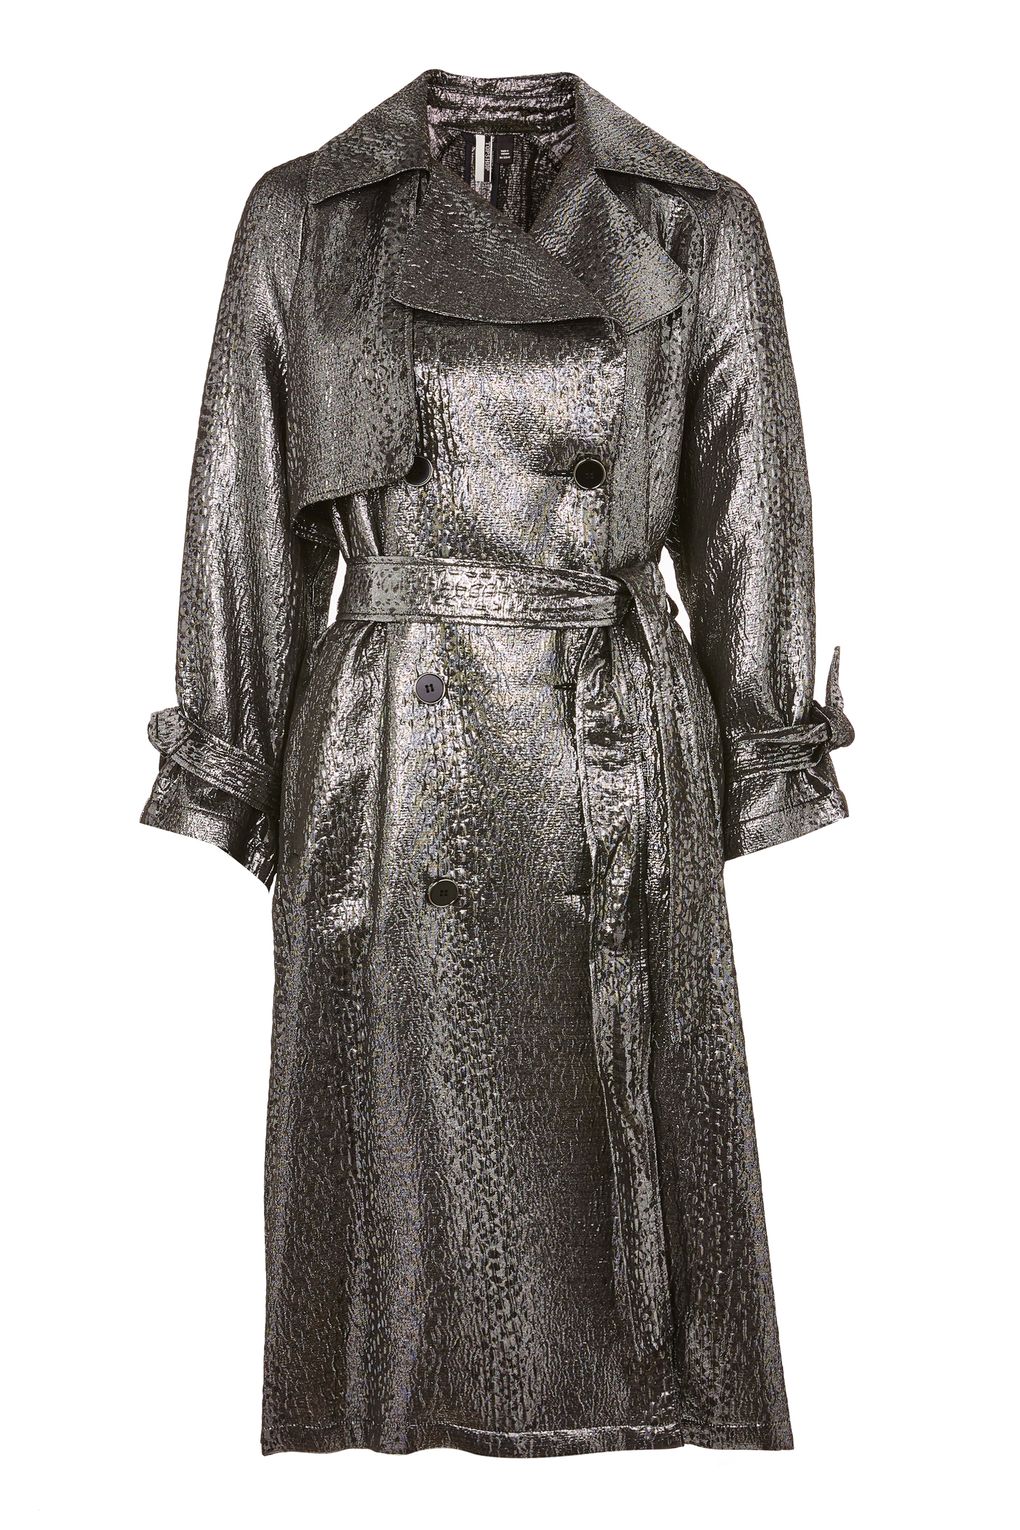 Bomb Product of The Day: Topshop’s Metallic Trench Coat